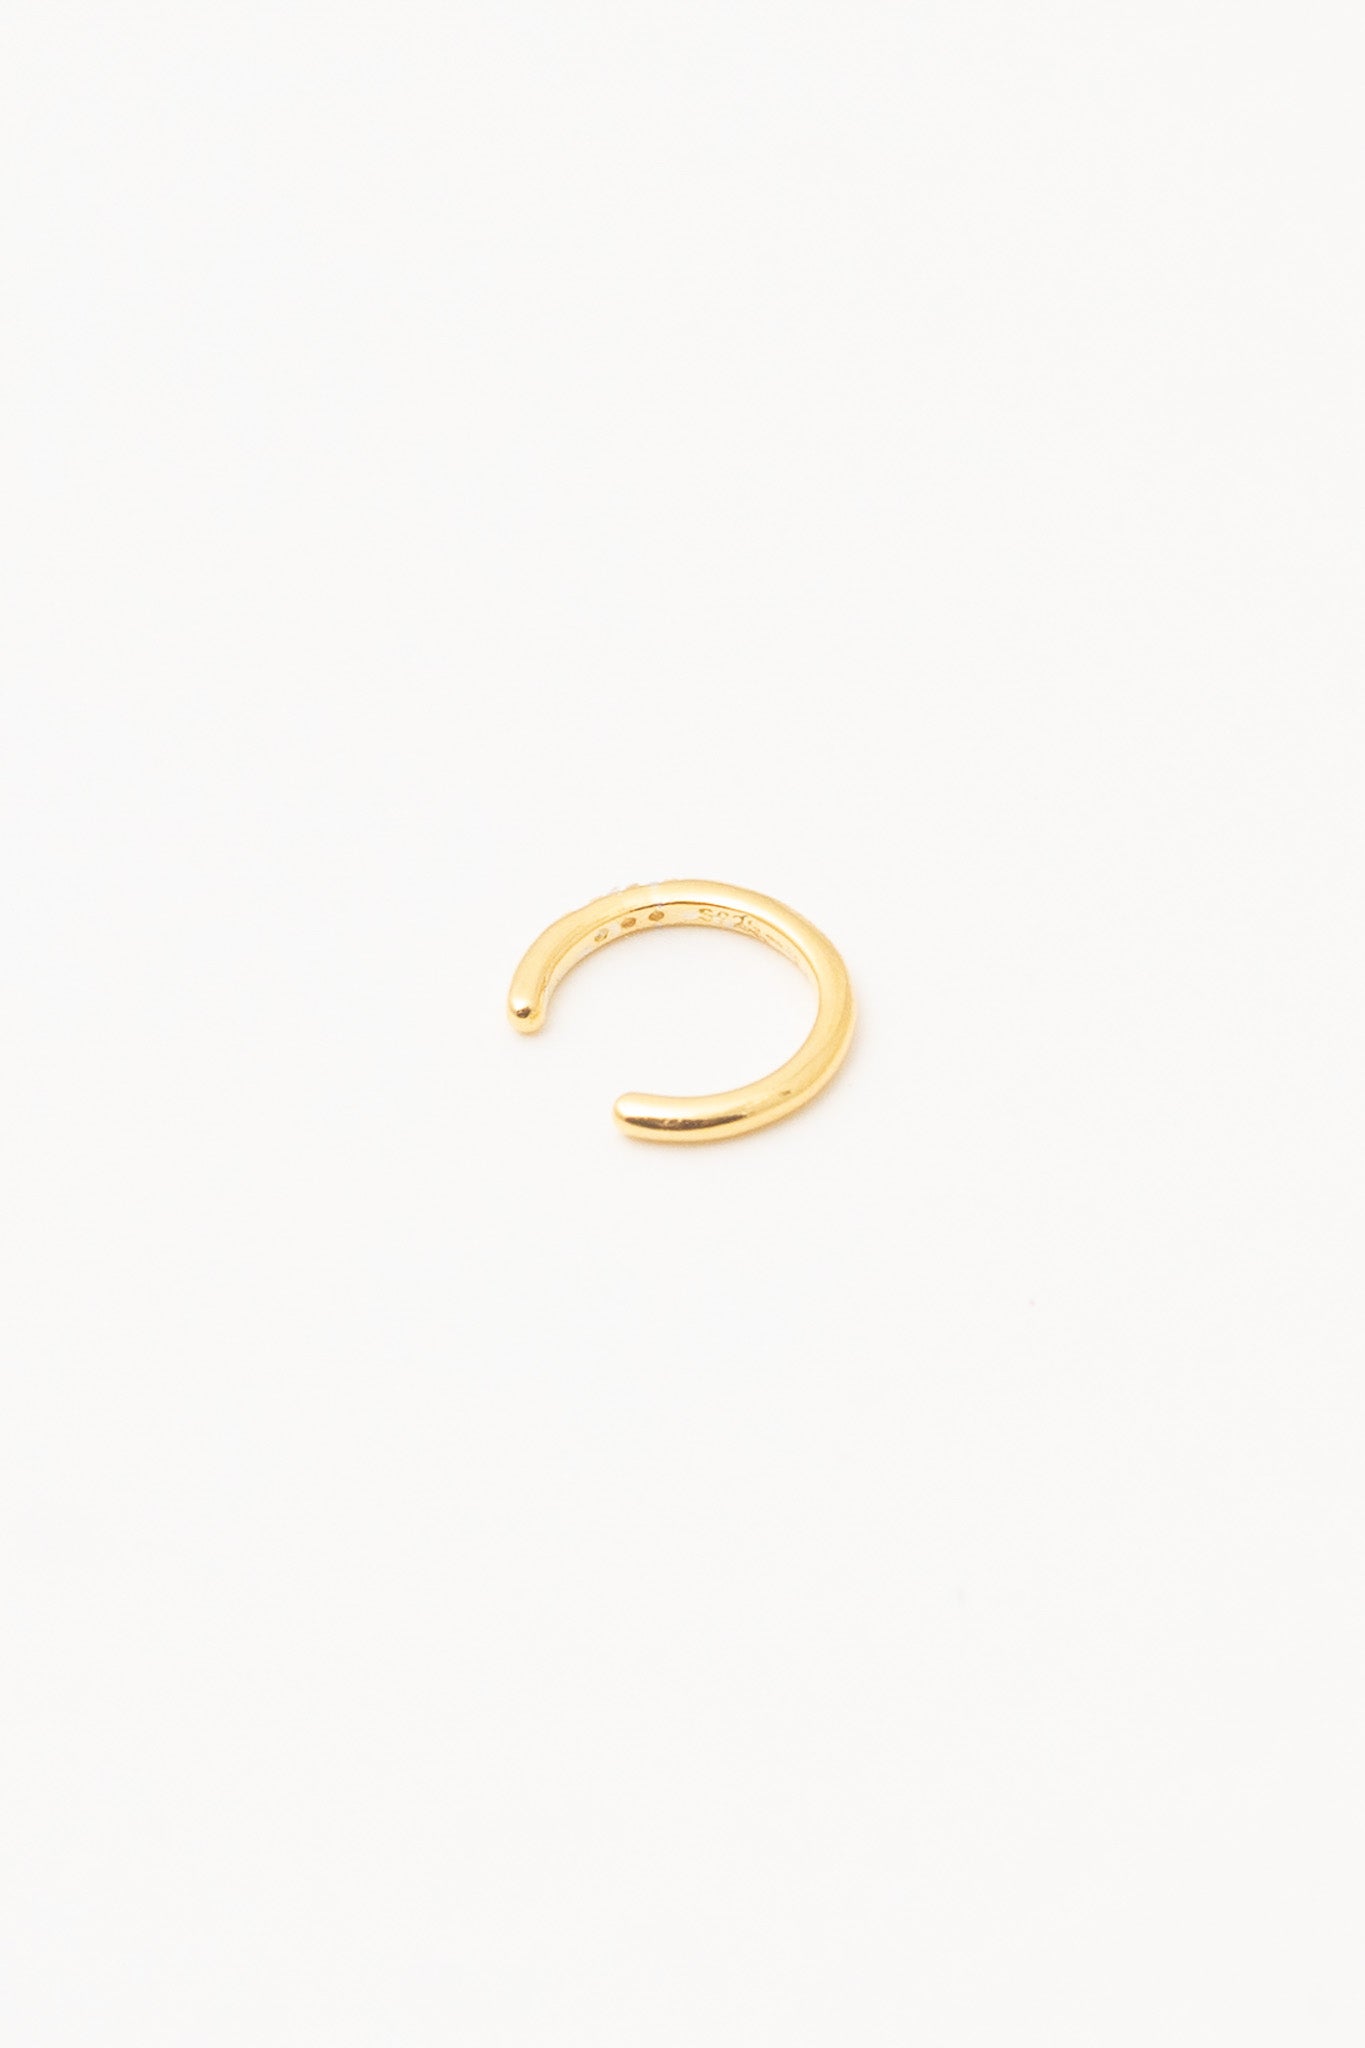 gold ear cuff on white background view from behind